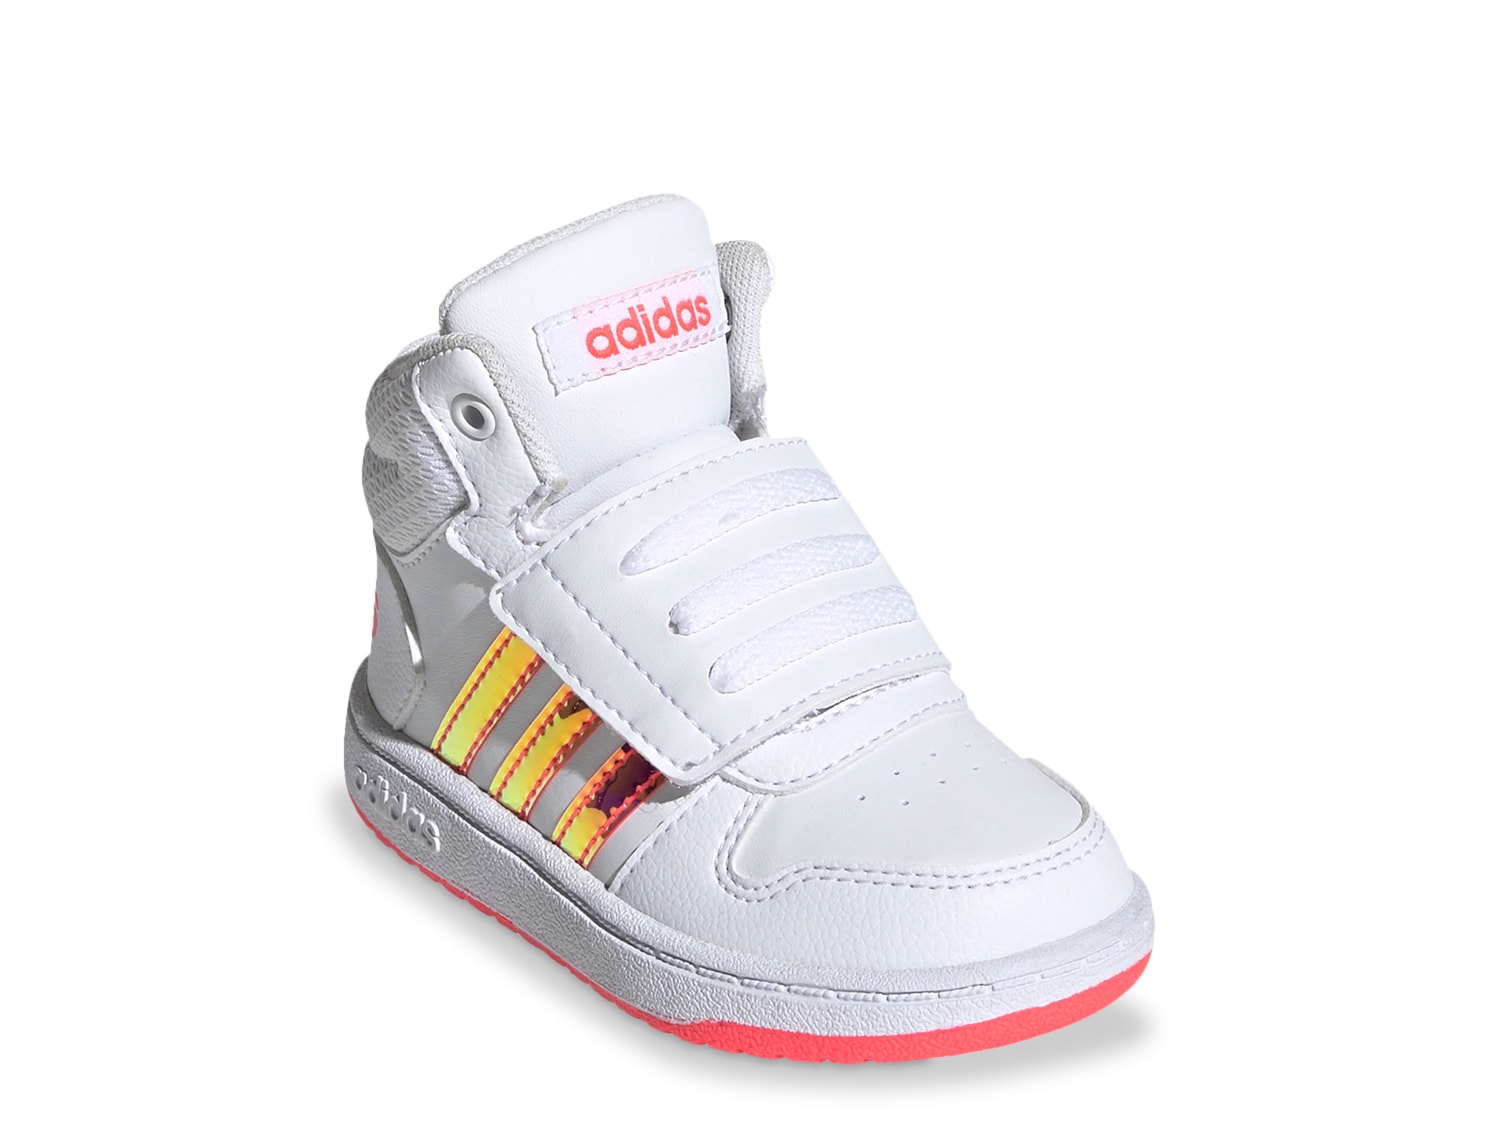 adidas hoops 2.0 mid toddler